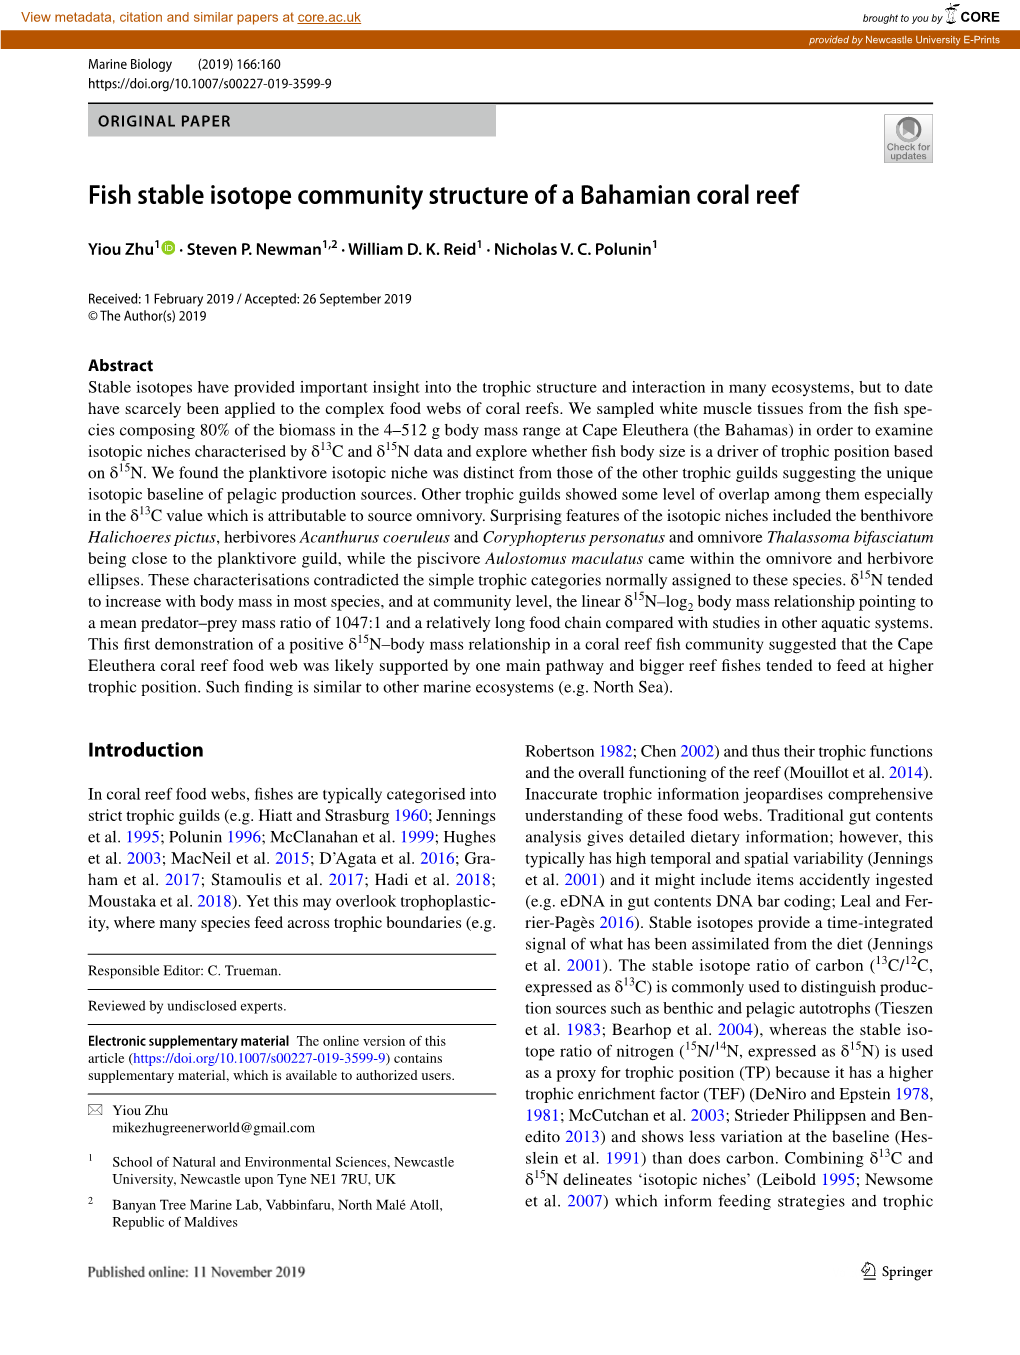 Fish Stable Isotope Community Structure of a Bahamian Coral Reef